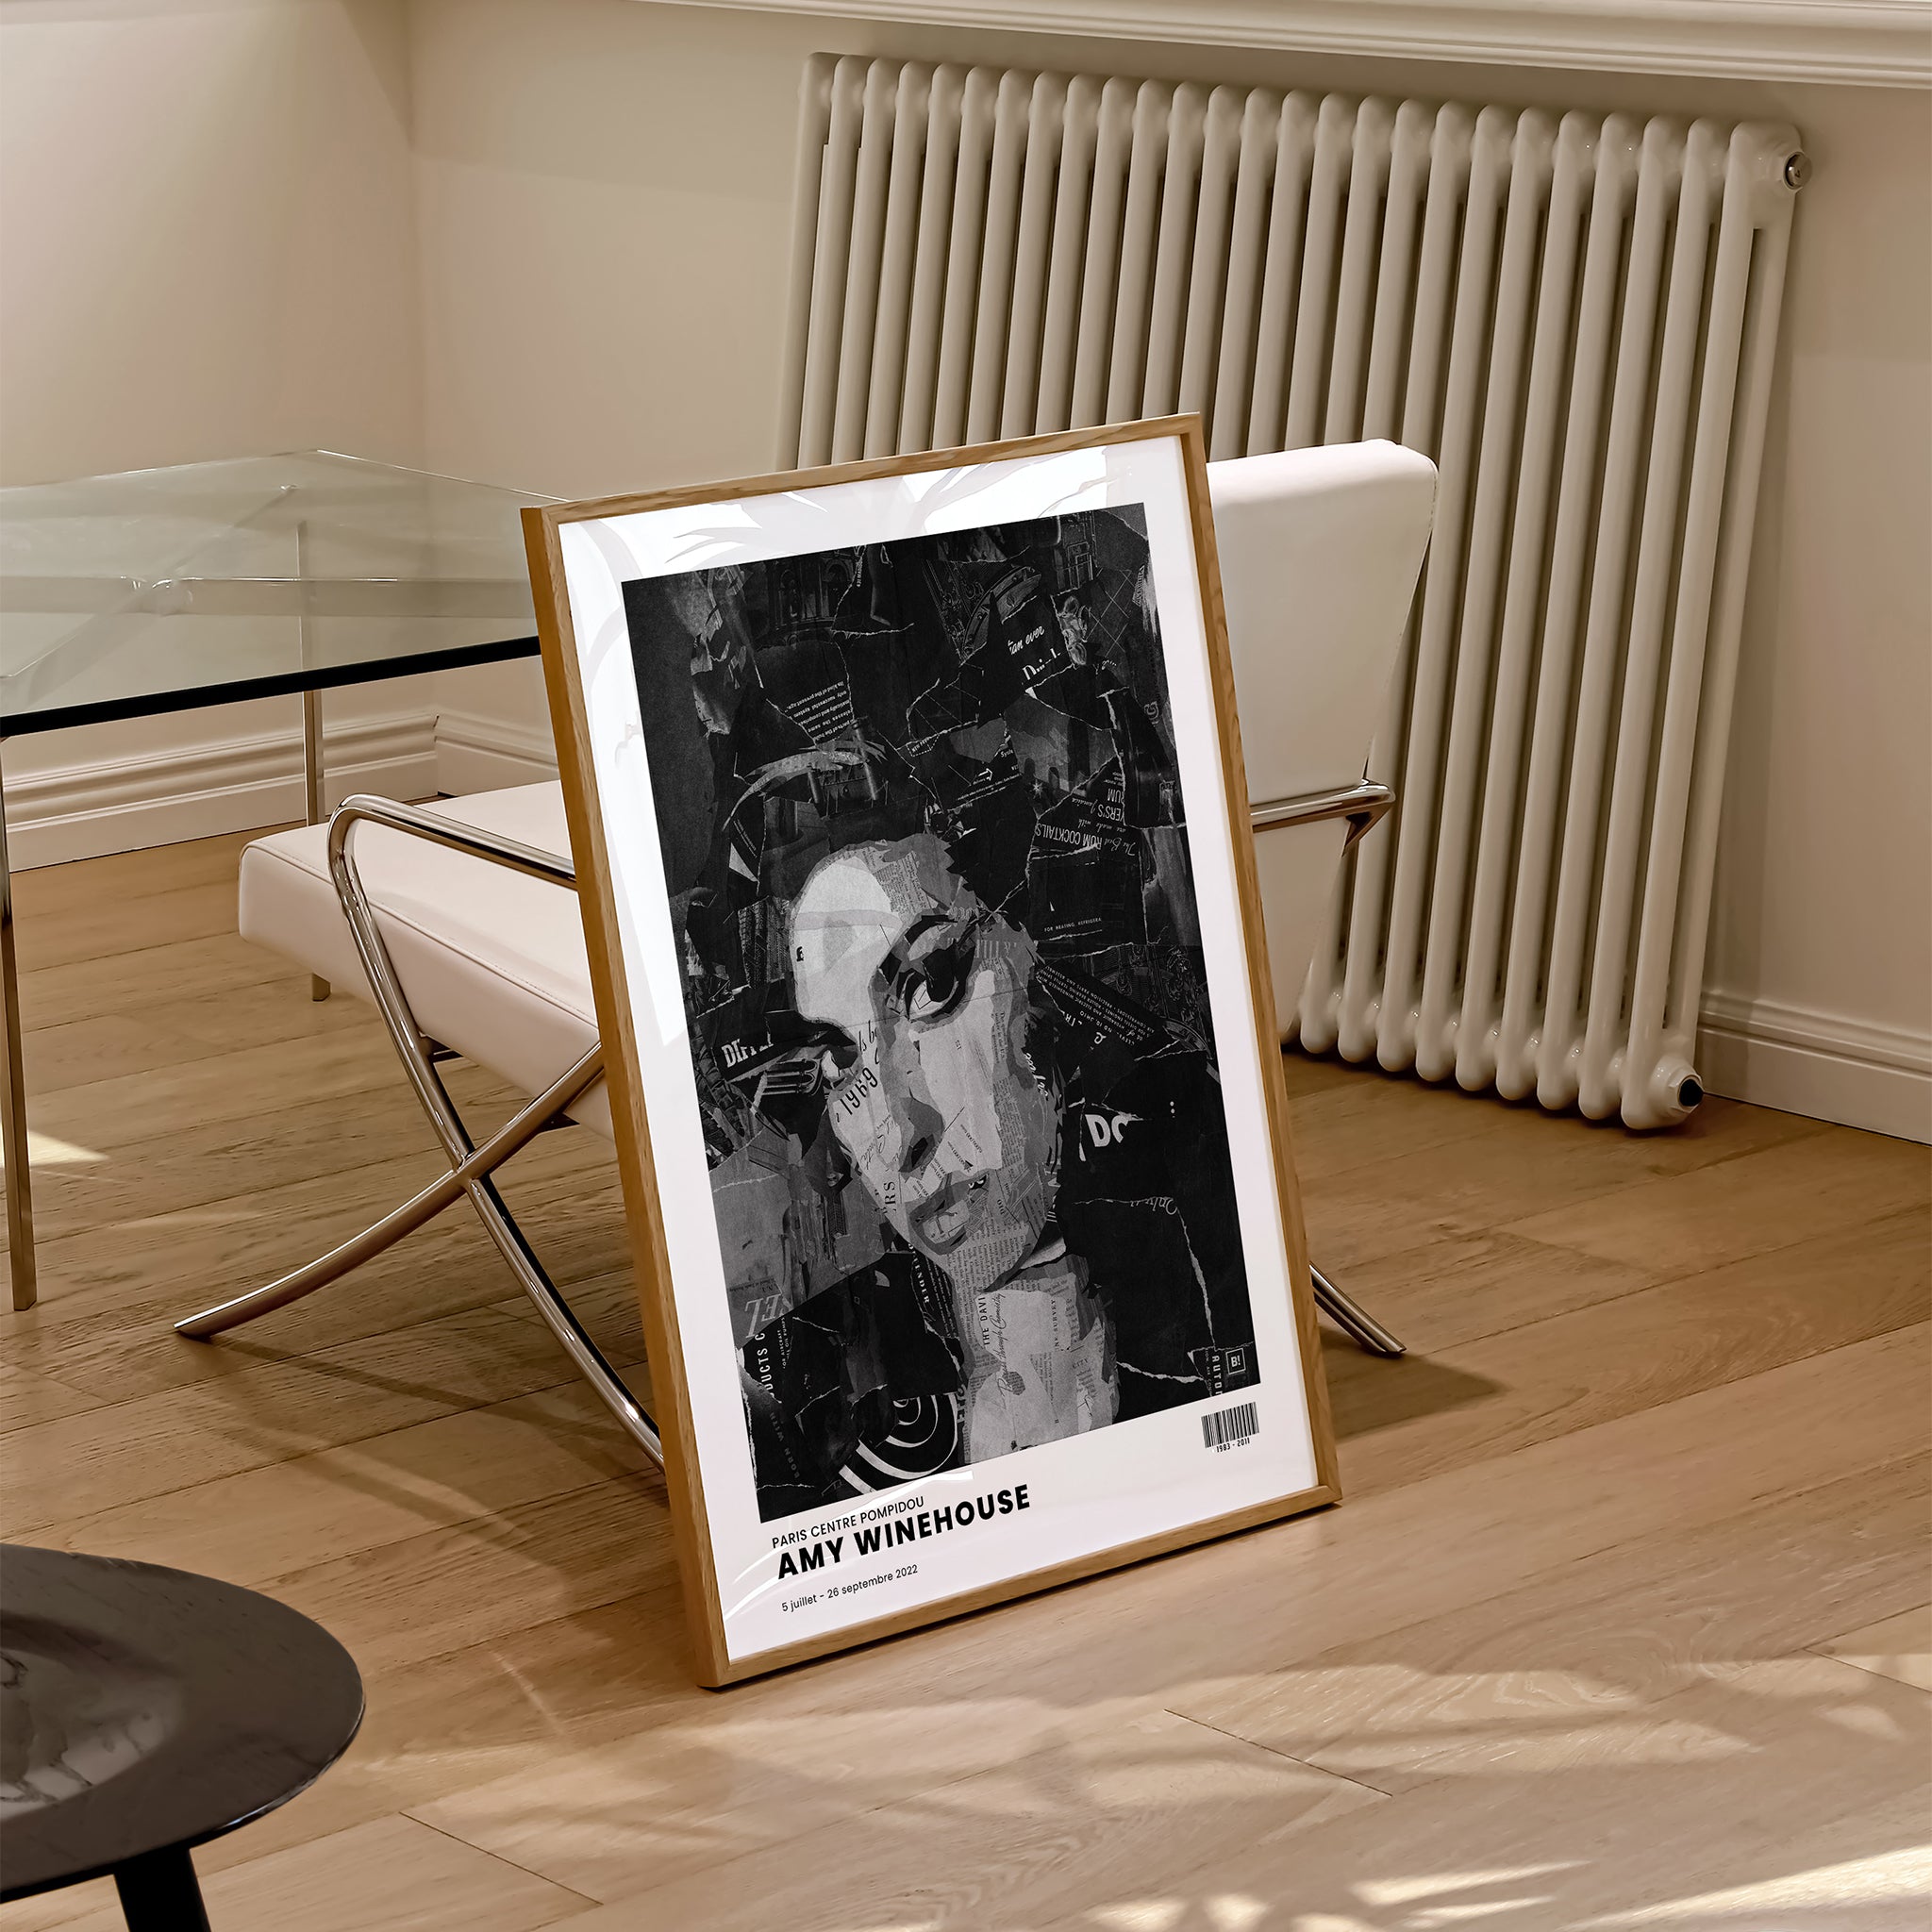 Be inspired by Iconic Amy Winehouse Paris Centre Pompidou Exhibition Art Print. The artwork is presented in a natural wood frame that captures its timeless beauty in every detail.